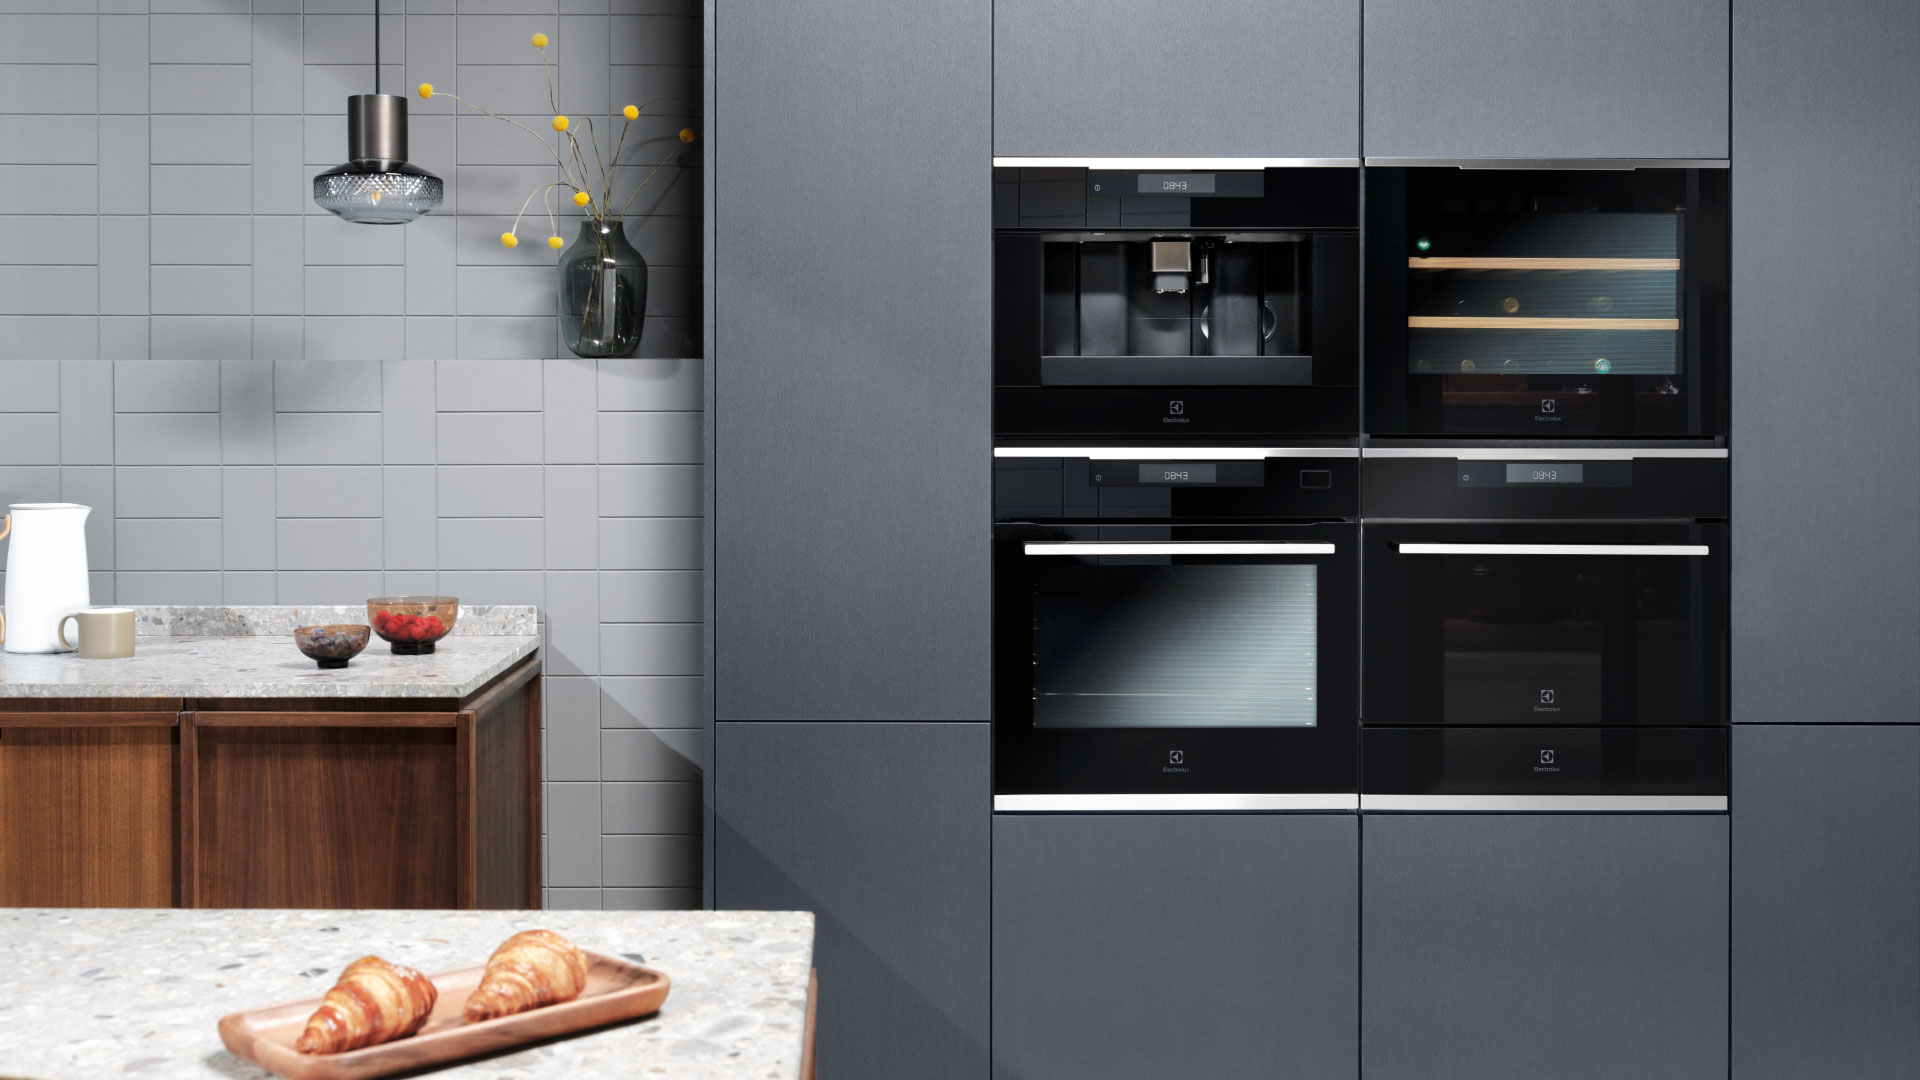 Steam ovens? Electrolux has invented them